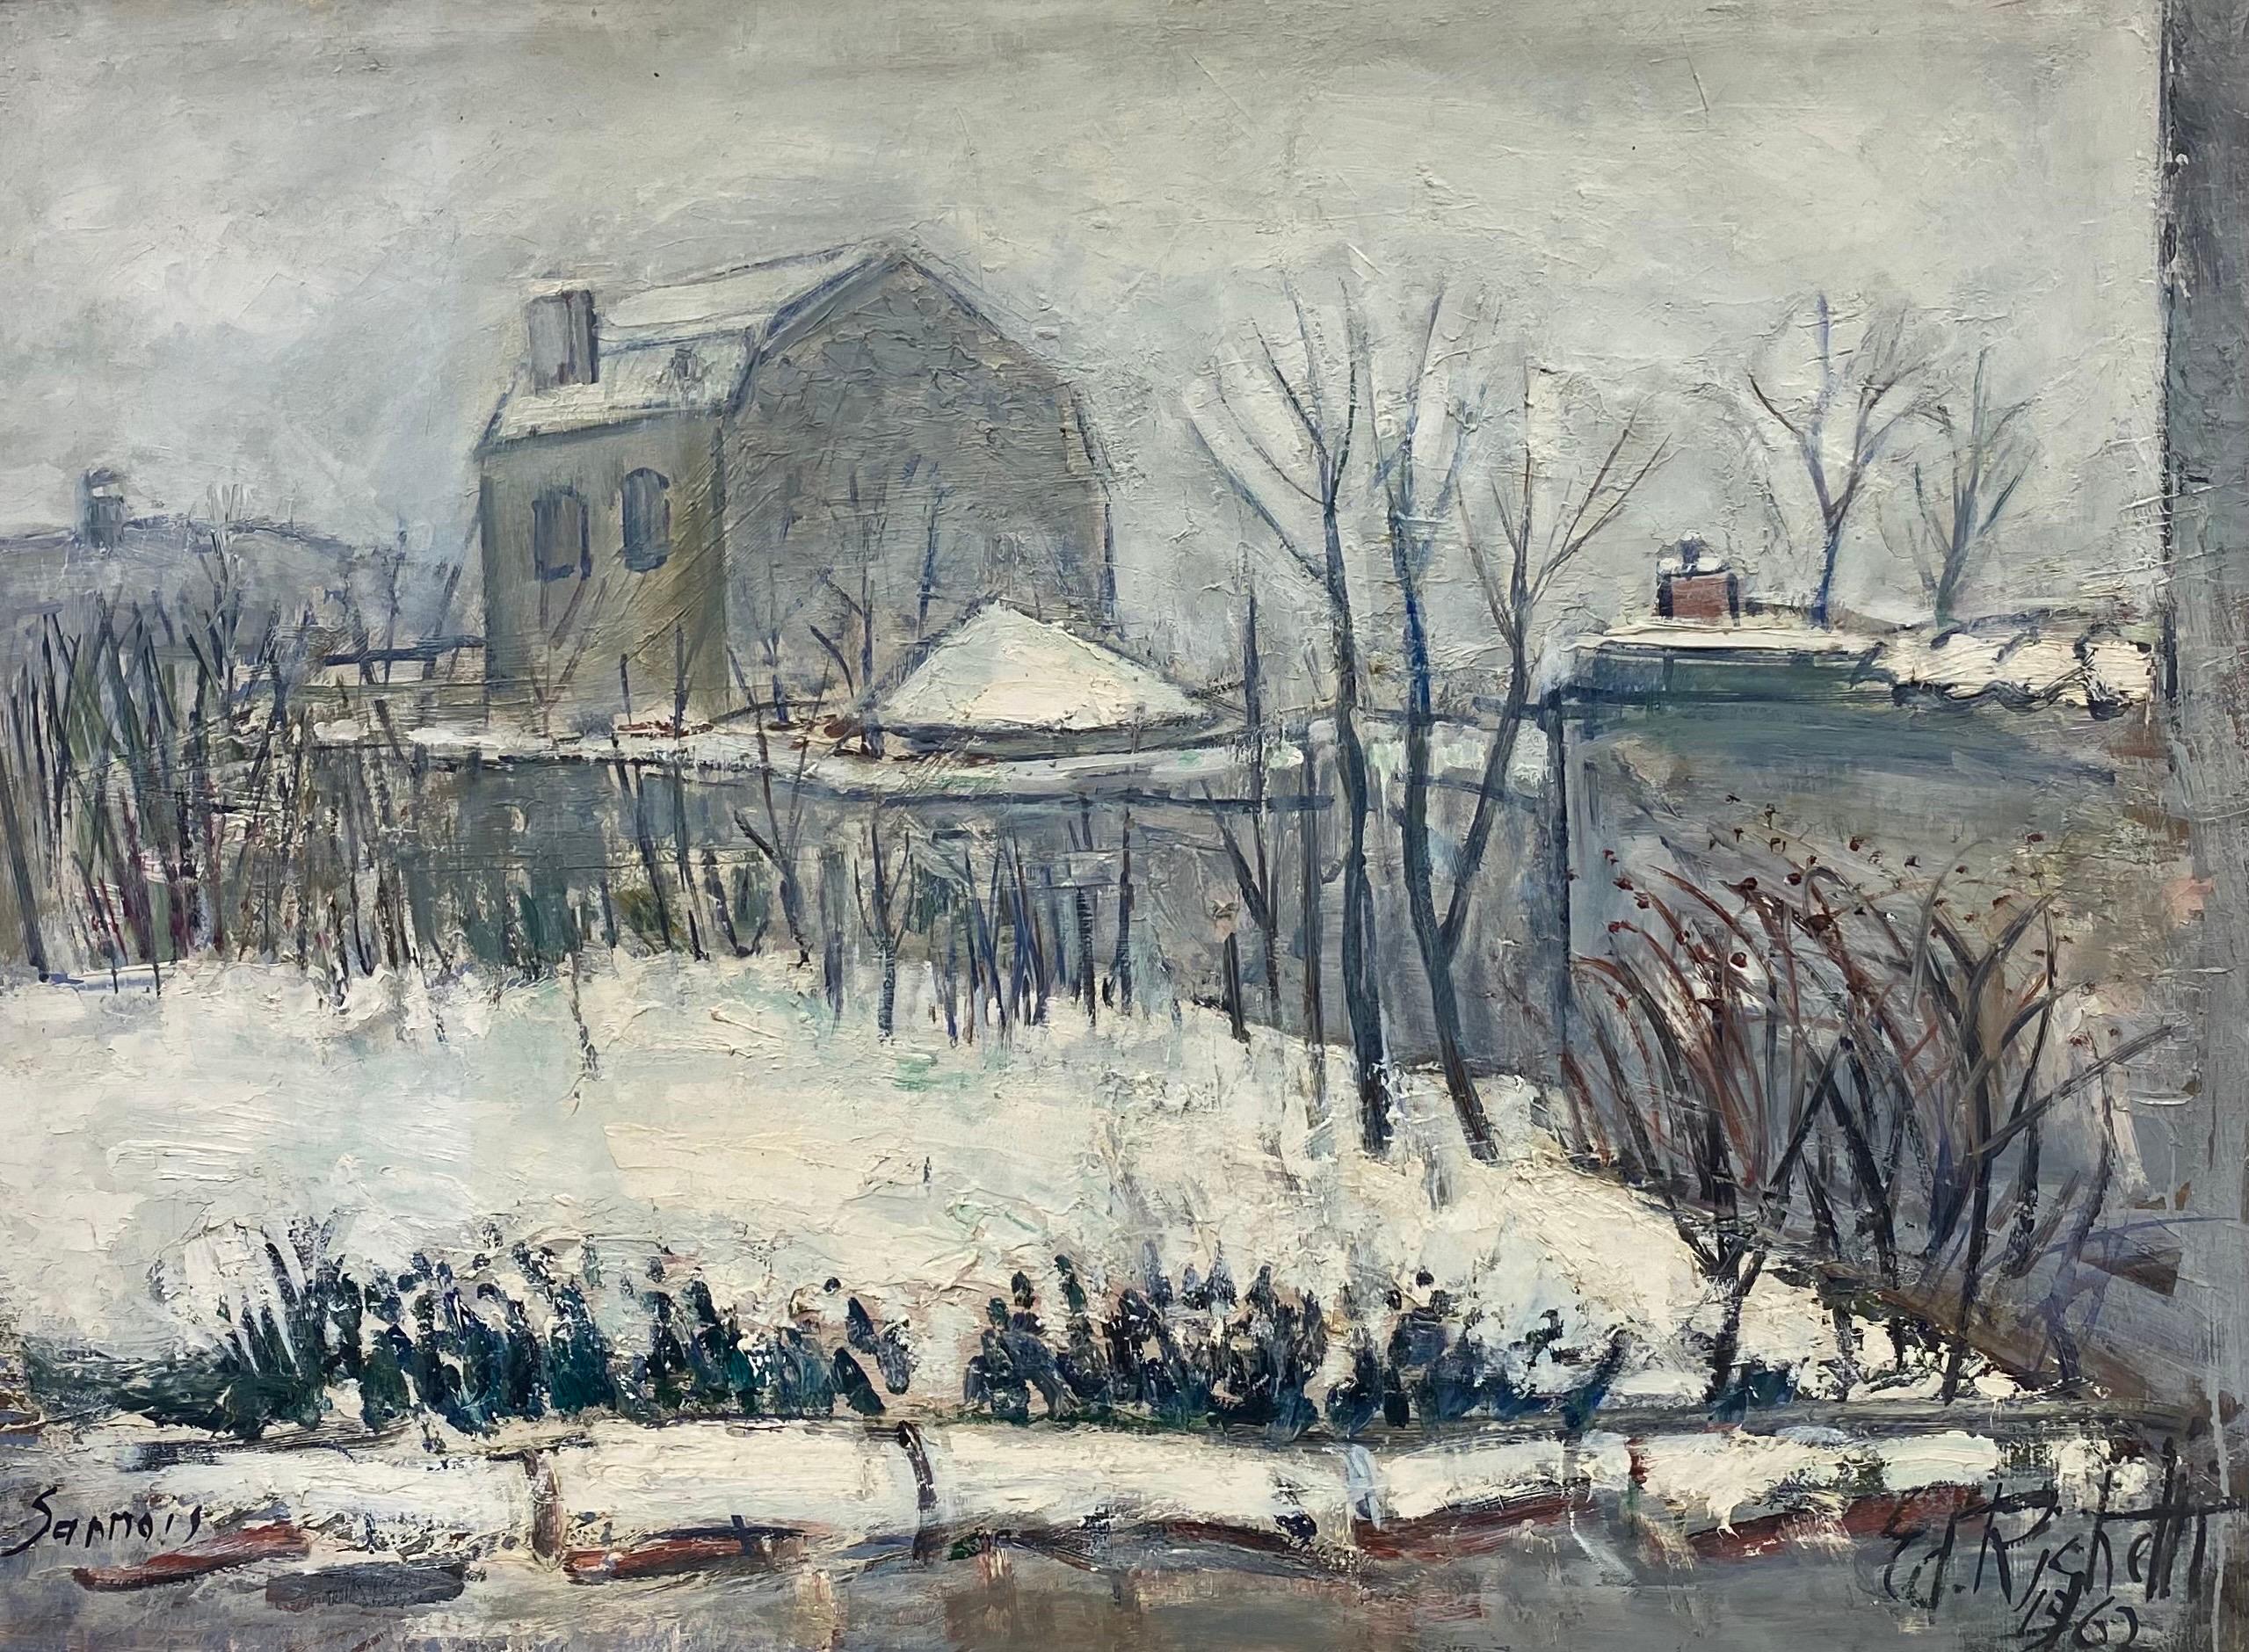 Édouard Righetti (1924-2001) Landscape Painting - 1960's French Post-Impressionist Oil - Winter French Landscape in Sannois, Paris